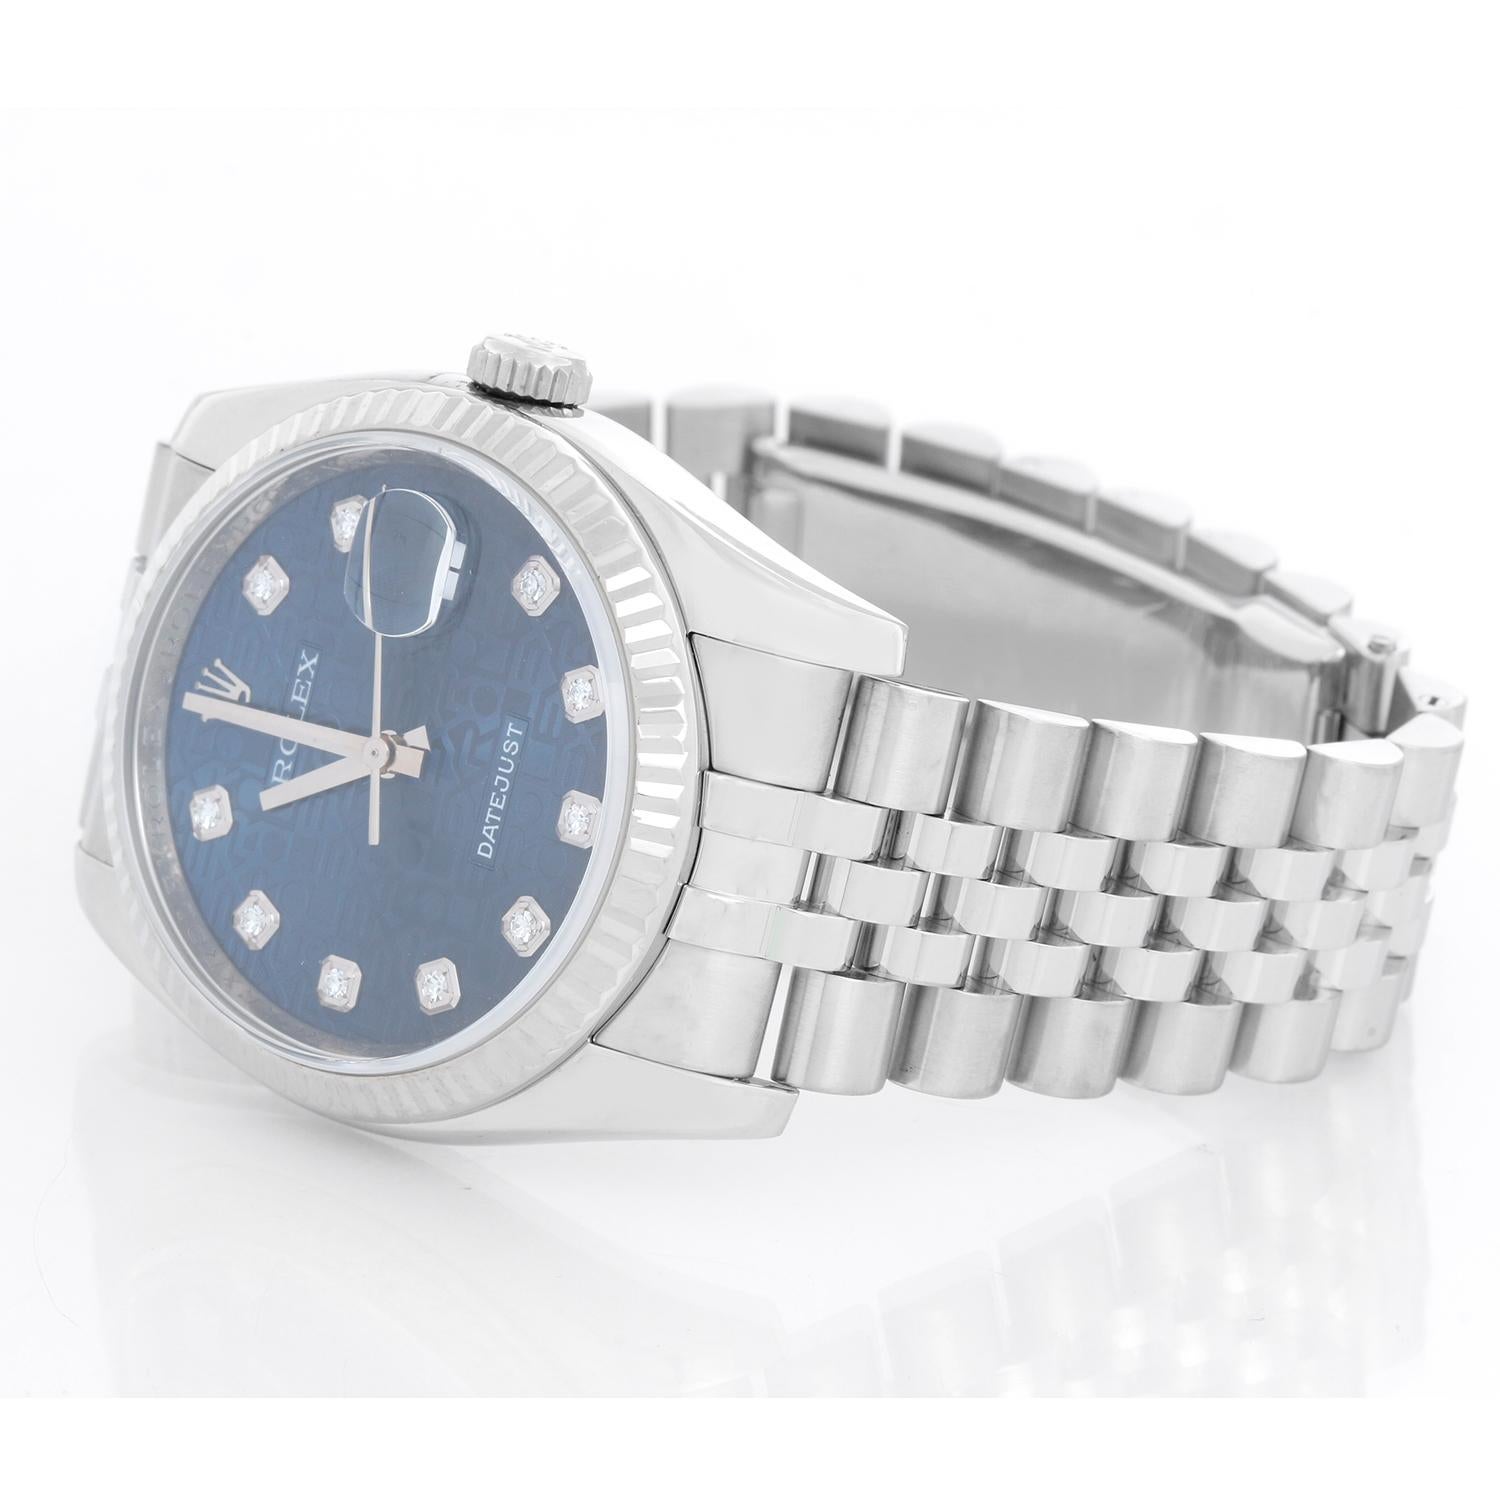 Rolex Datejust Men's Stainless Steel Watch 116234 In Excellent Condition For Sale In Dallas, TX